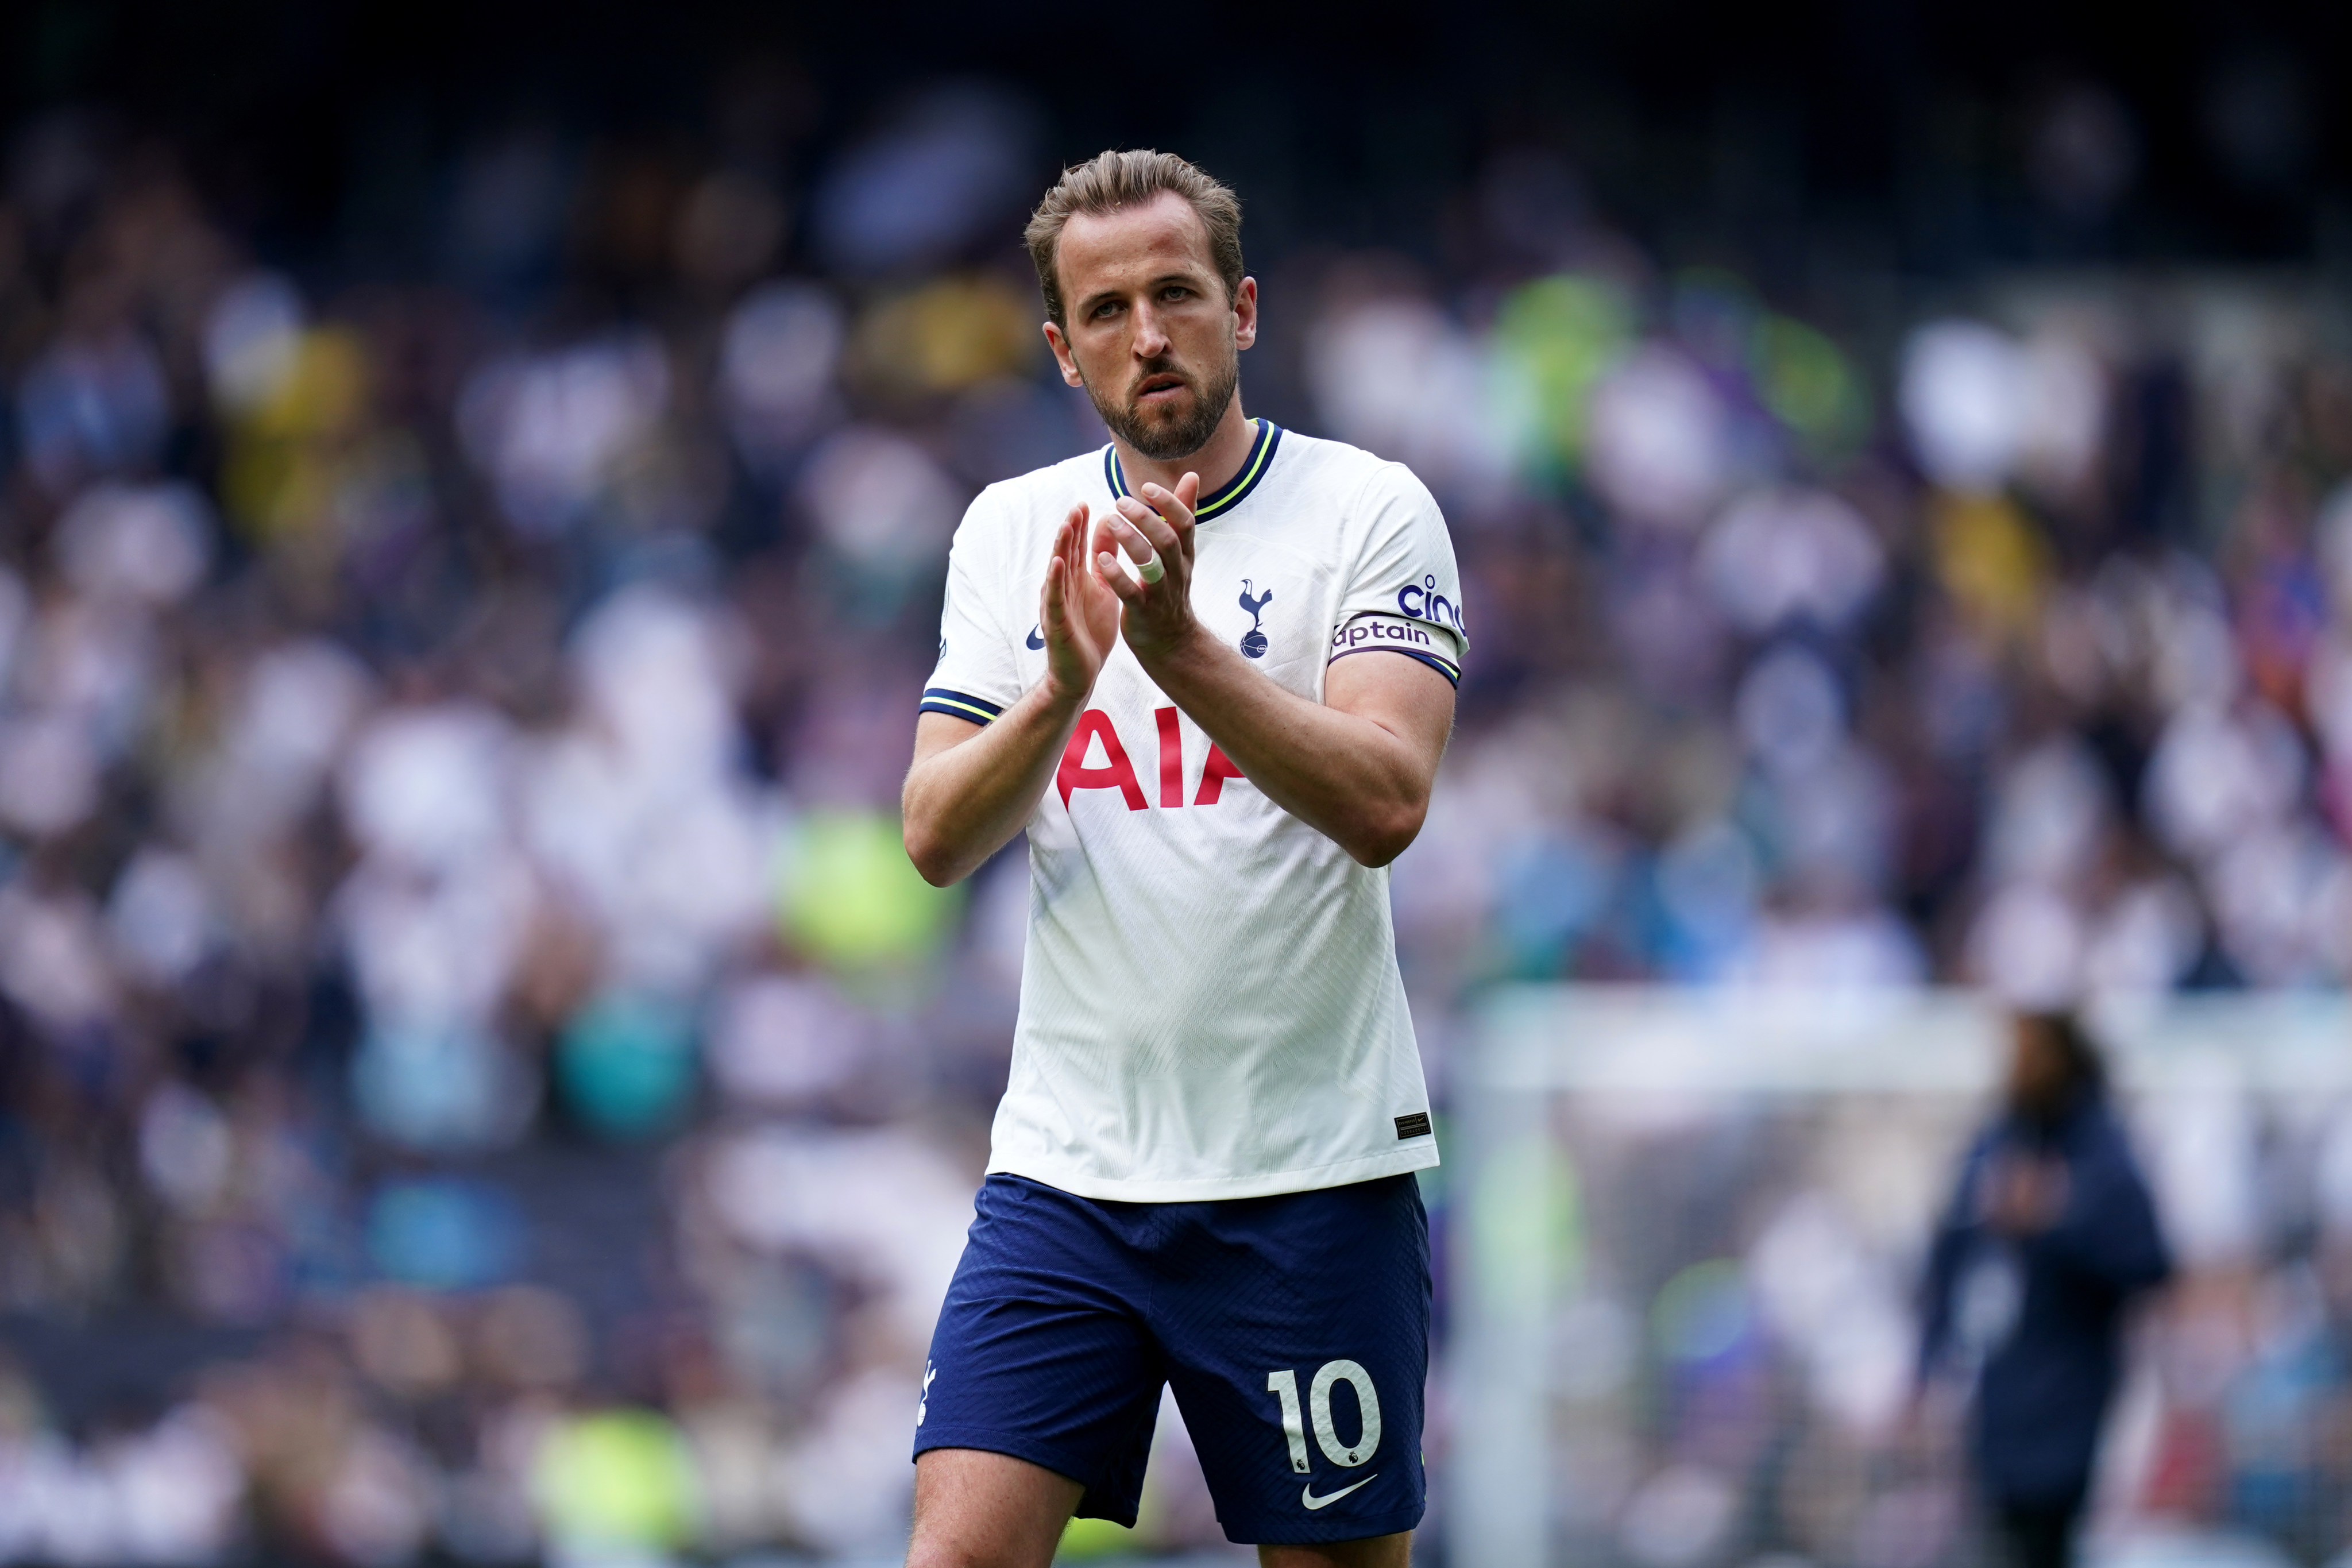 Tottenham Hotspur’s Harry Kane applauds the fans after their loss at home to Brentford. Photo: dpa